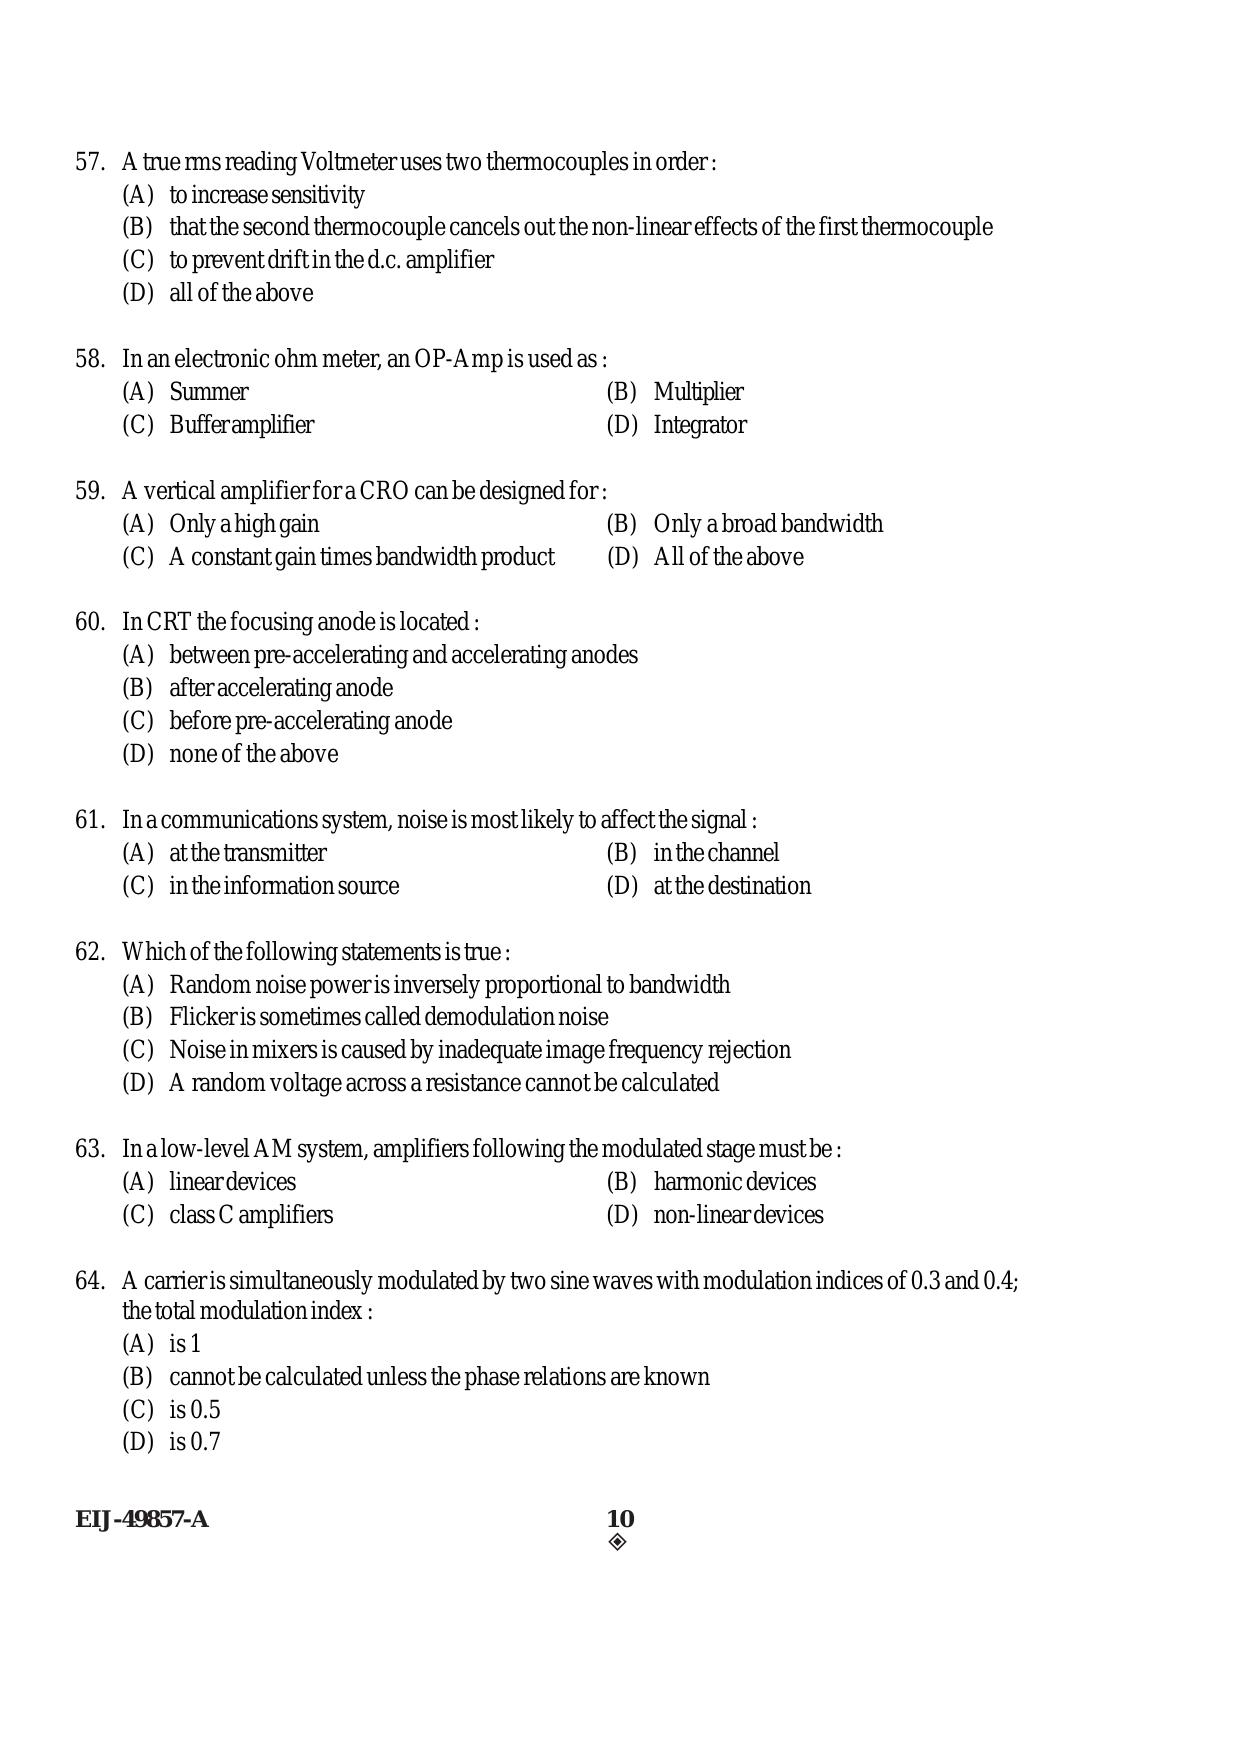 SEBI Officer Electrical Engineering Previous Paper - Page 10